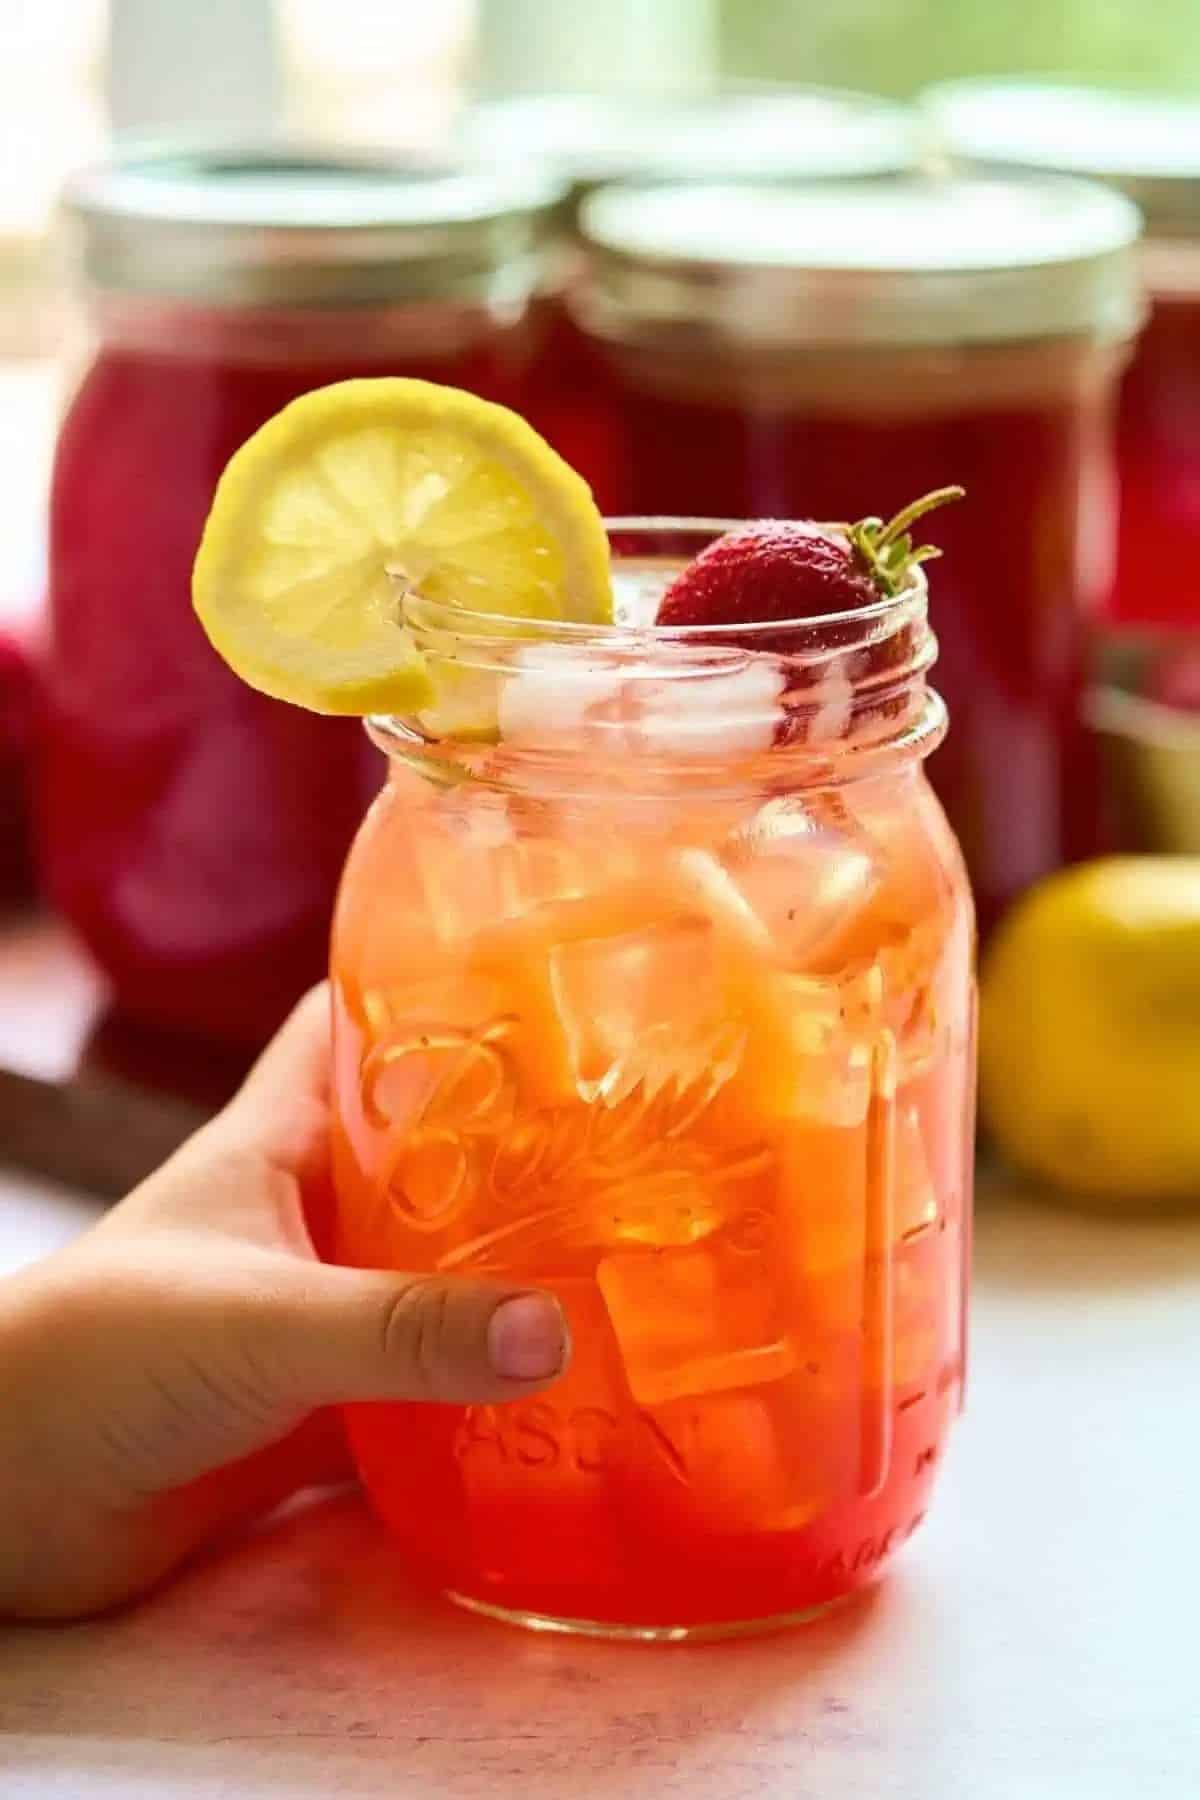 Strawberry lemonade concentrate in a glass jar.